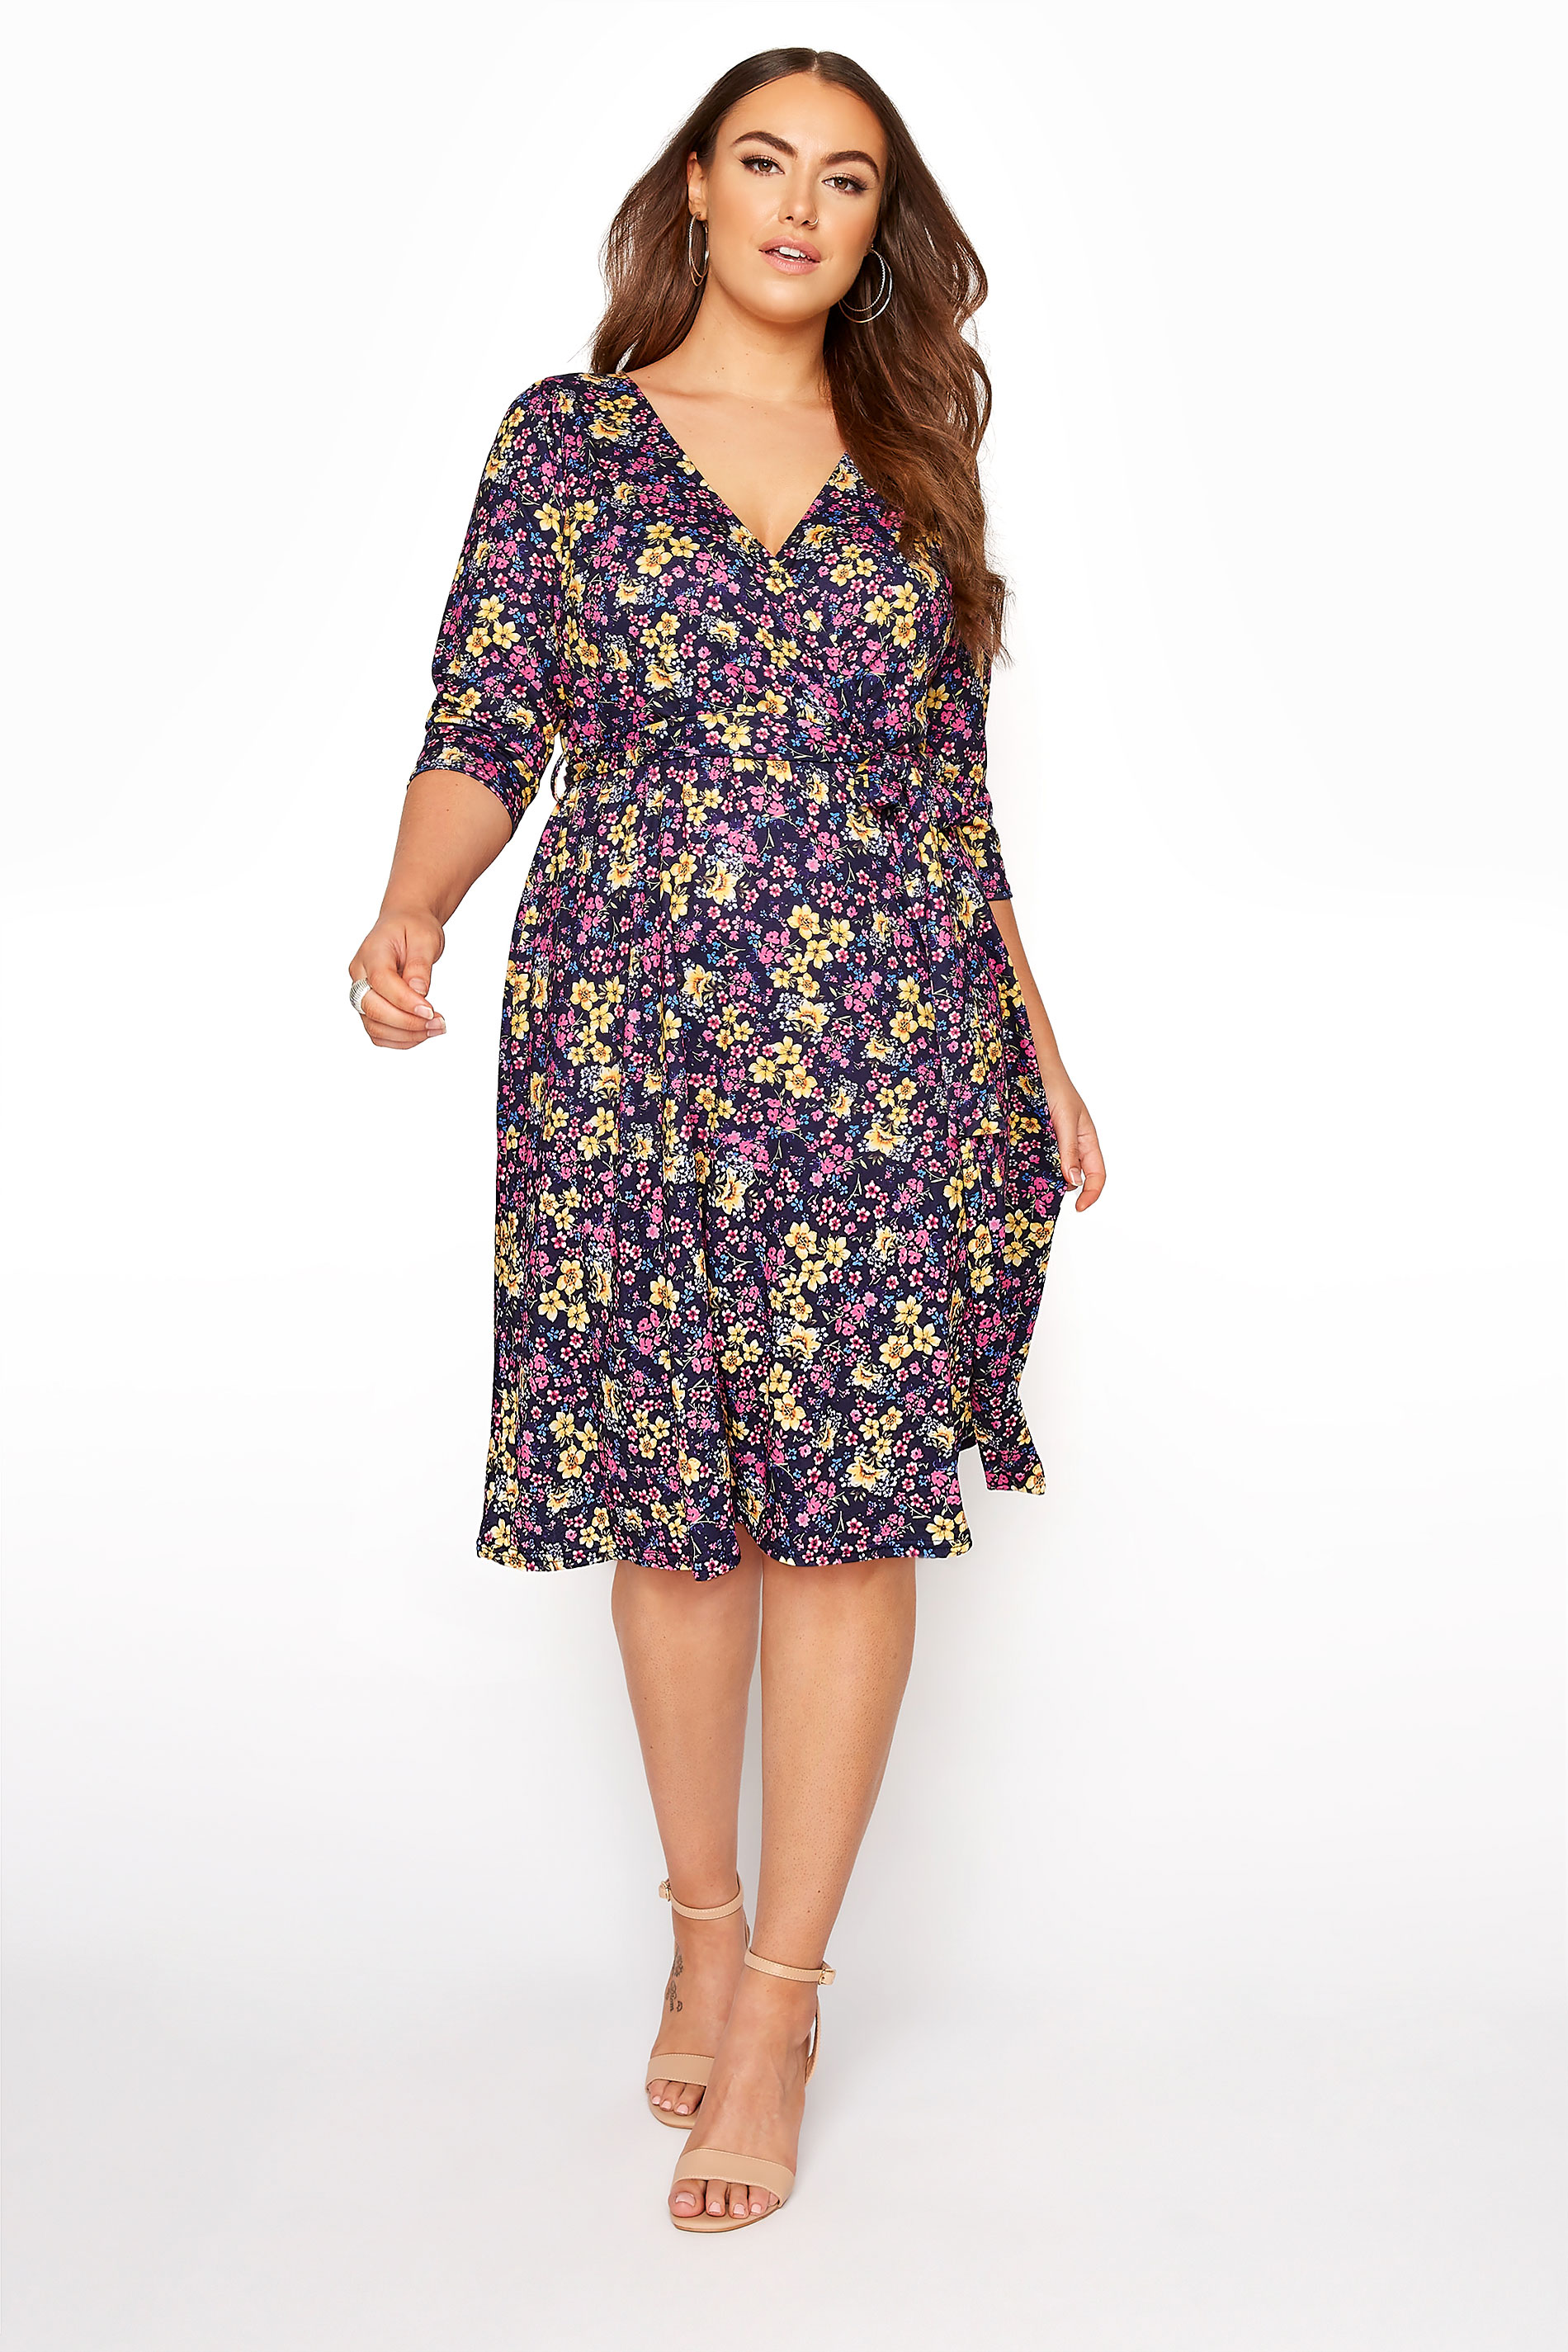 YOURS LONDON Navy Blue Floral Wrap Midi ...